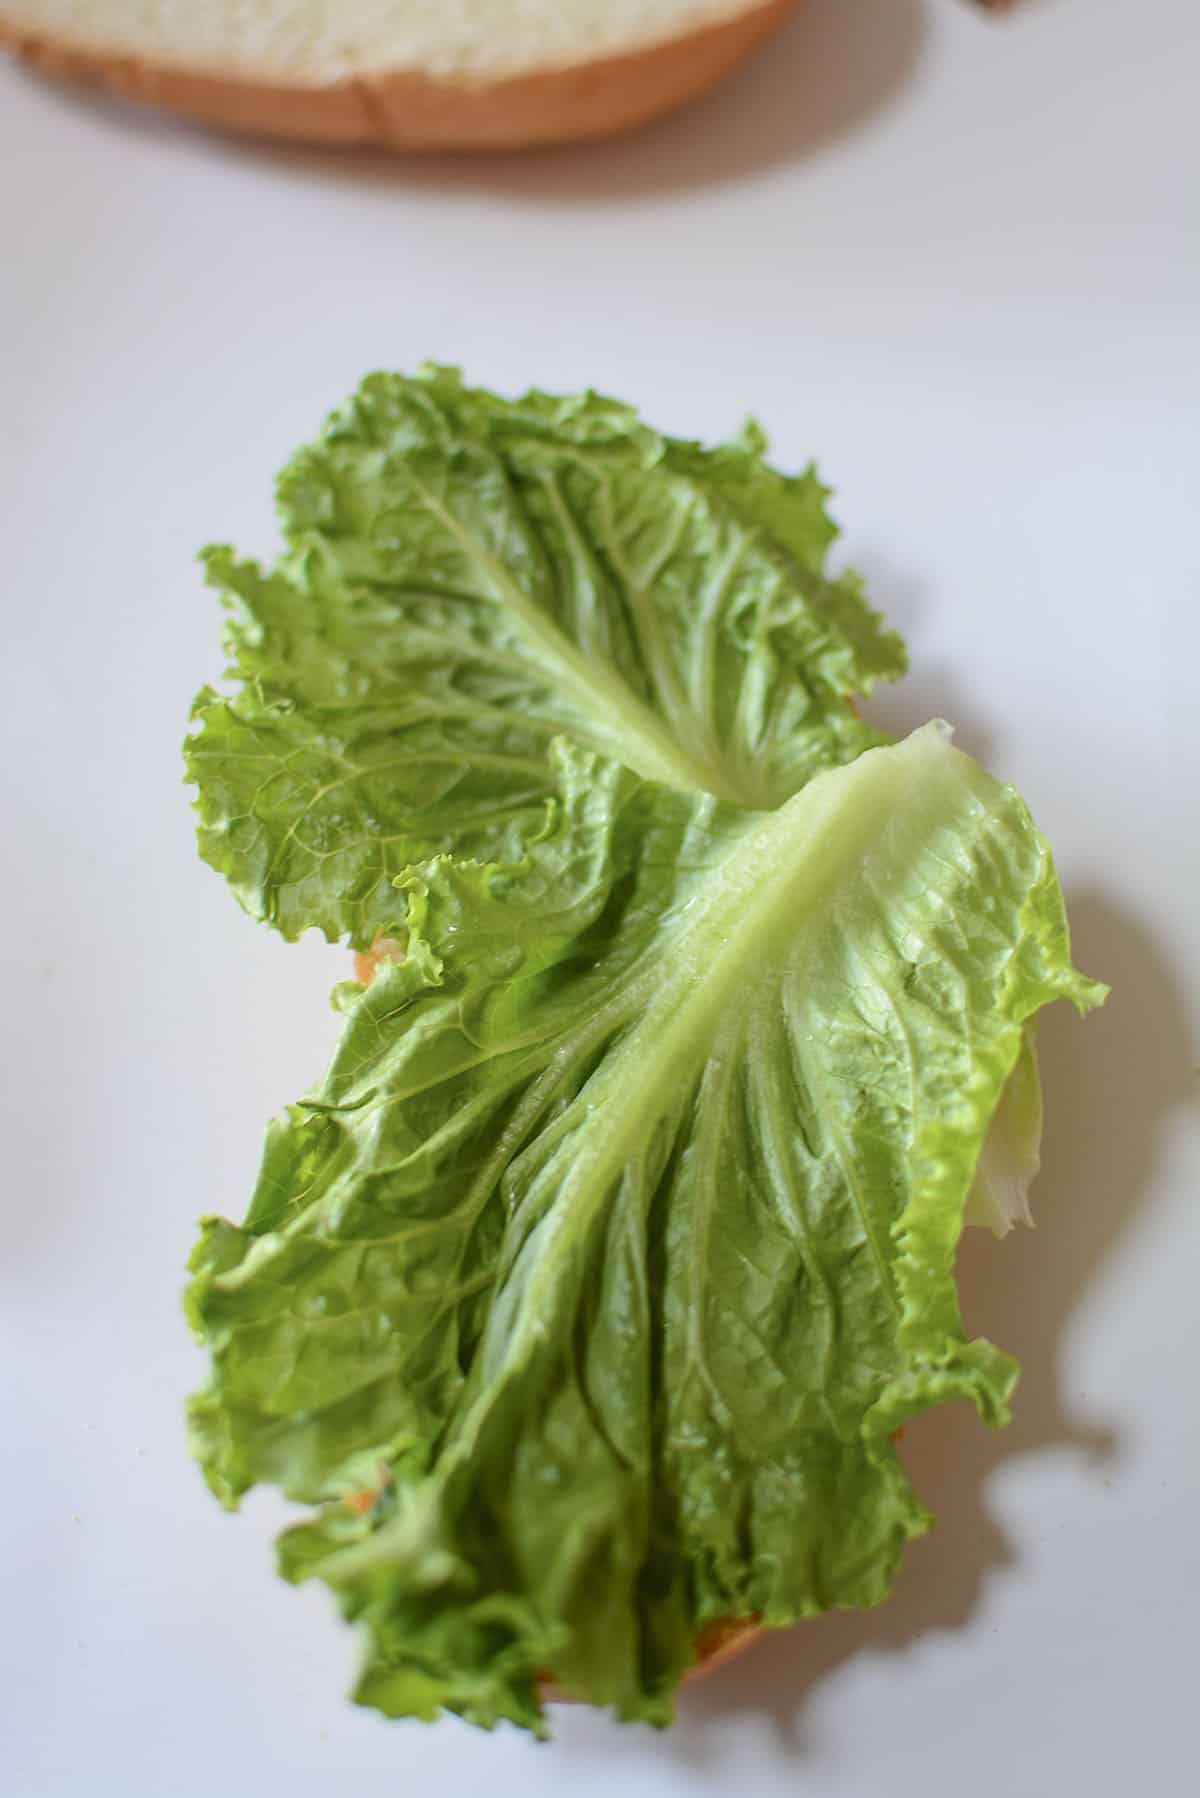 Romaine lettuce laying on the bottom portion of the bun.